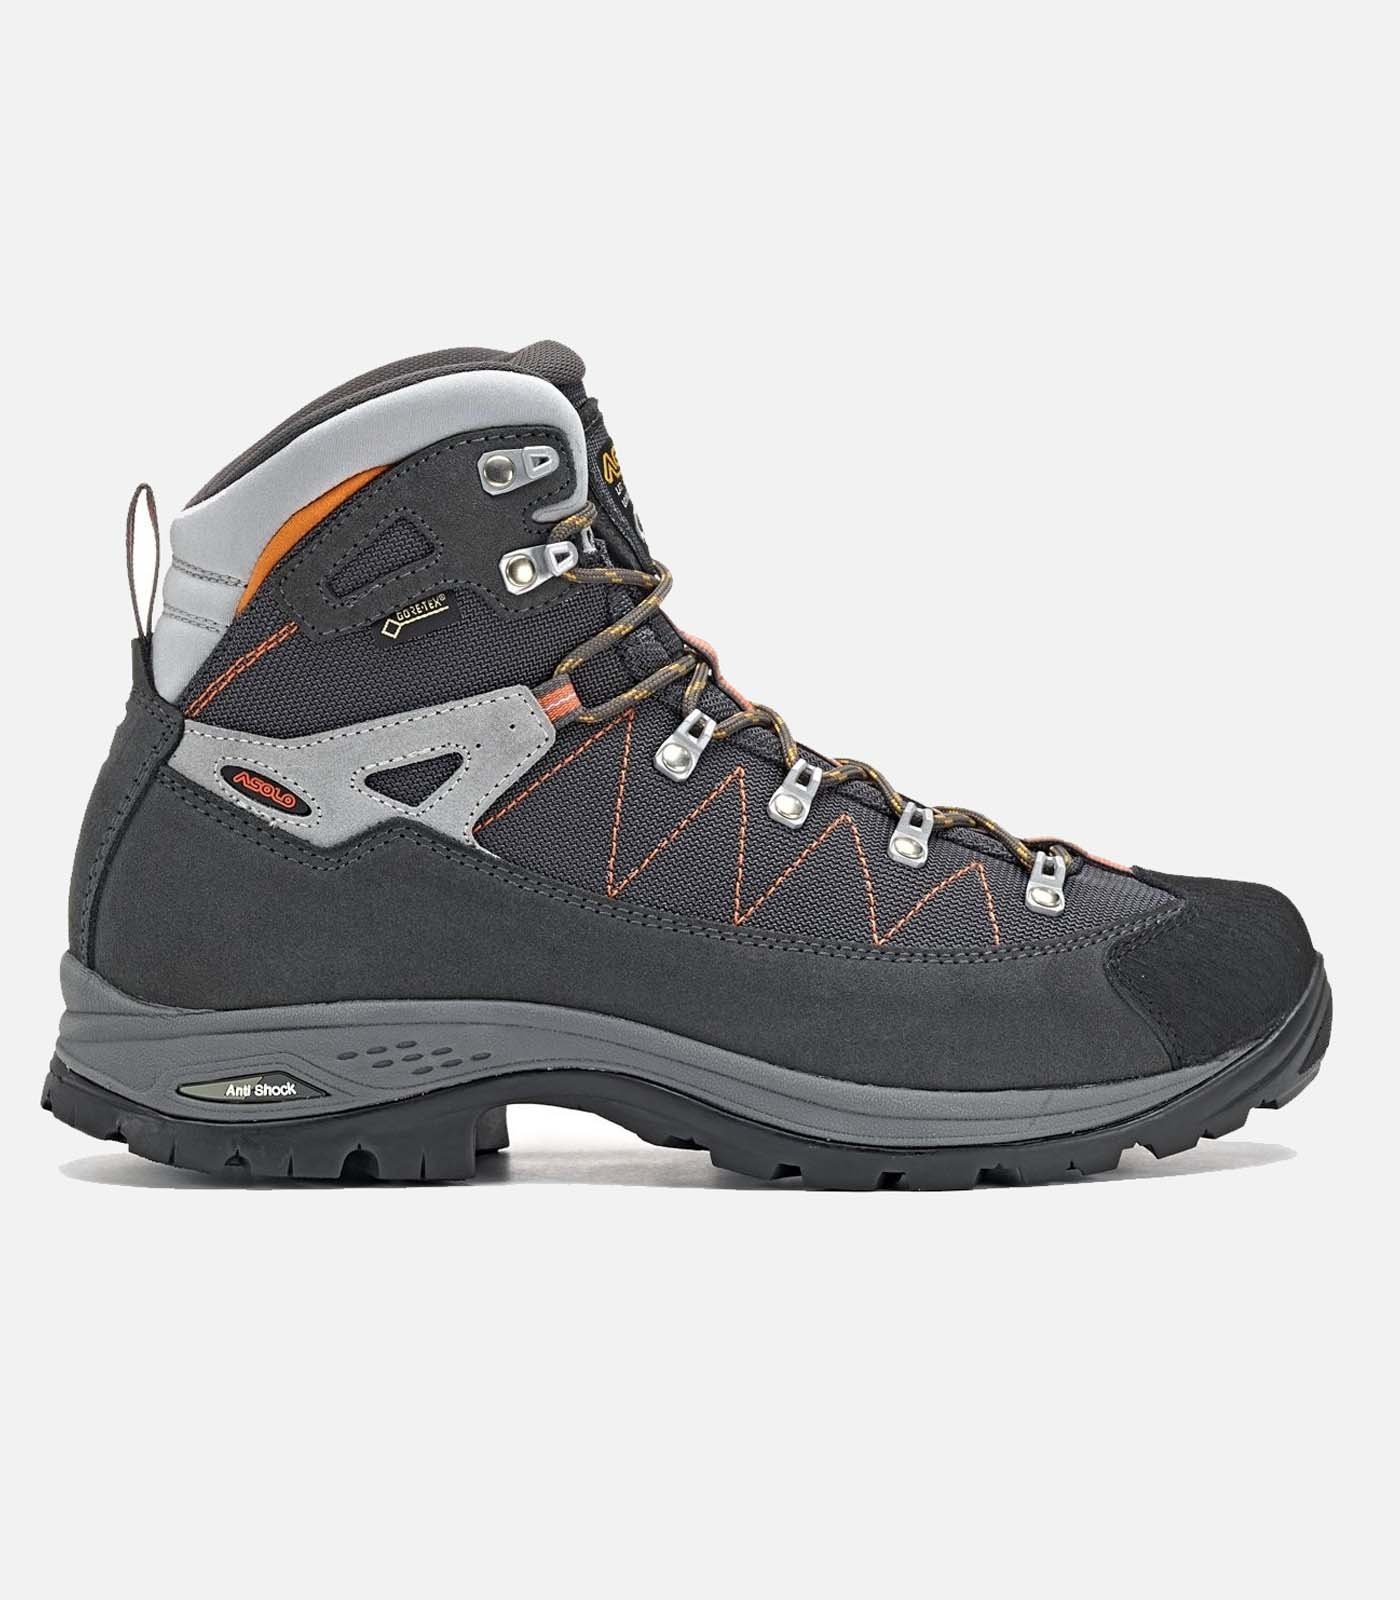 ASOLO FINDER GV hiking boots